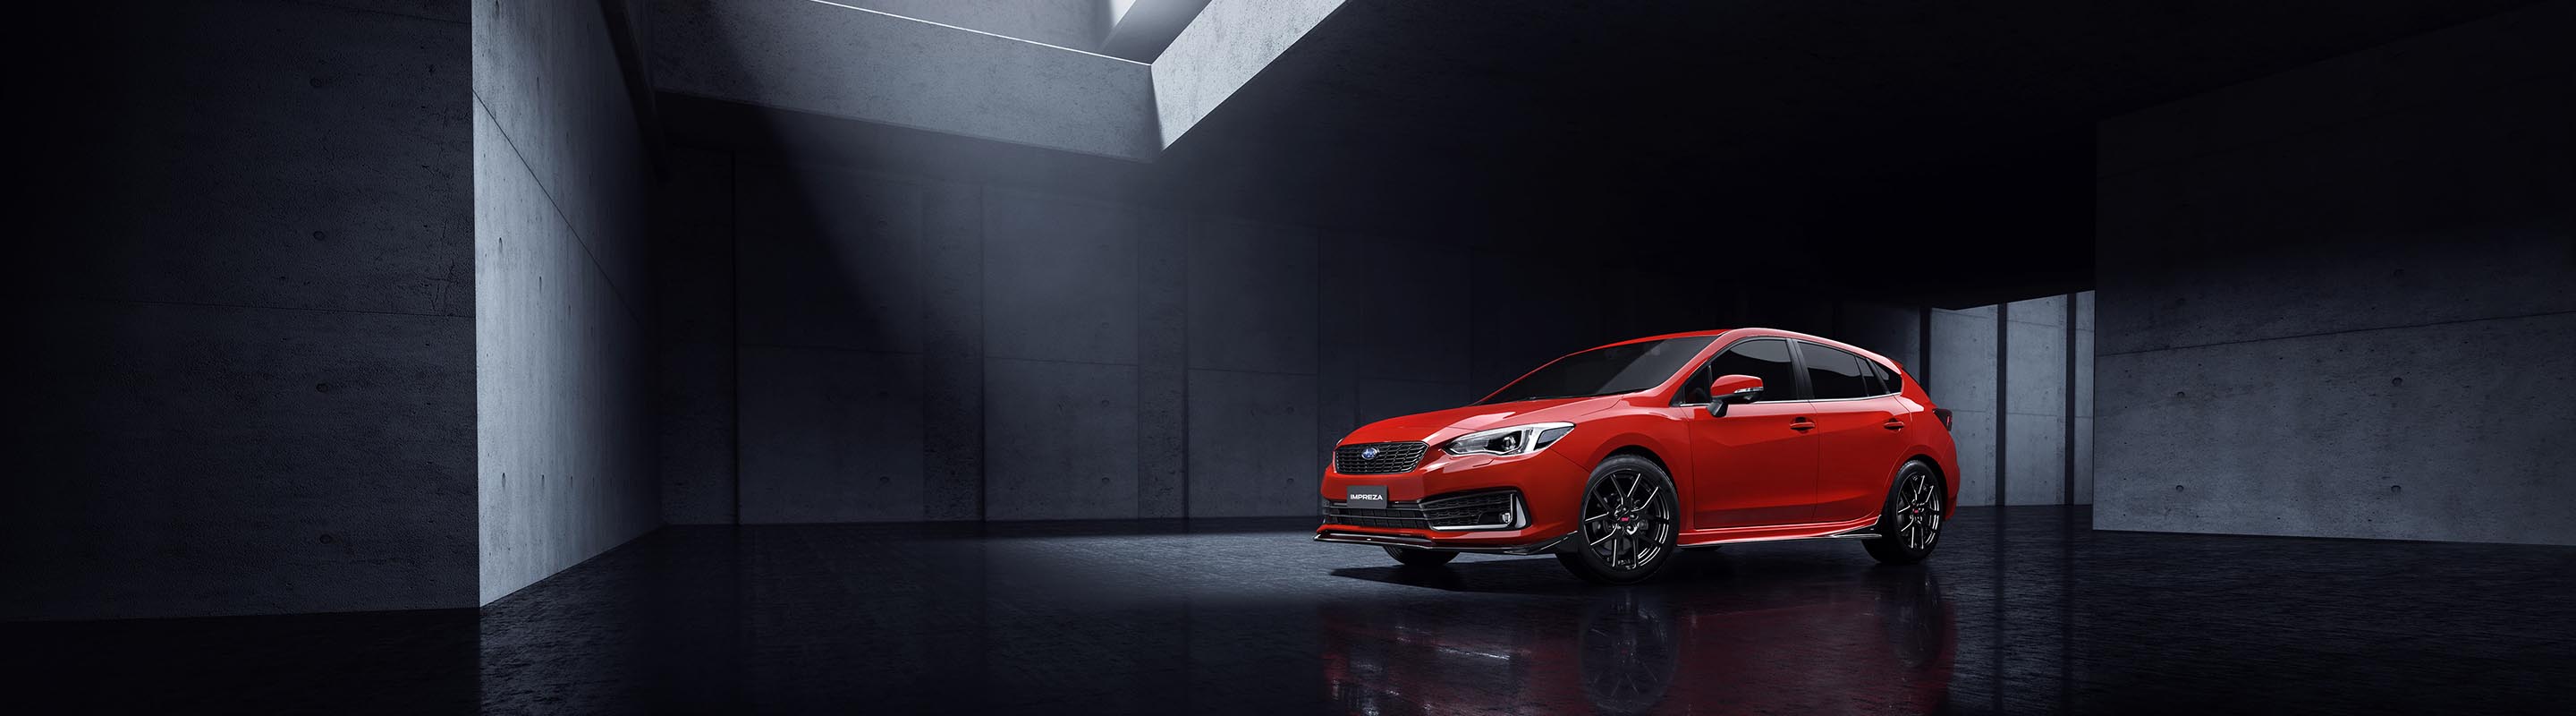 Subaru unleashes special edition Impreza to celebrate 30 years of the iconic model